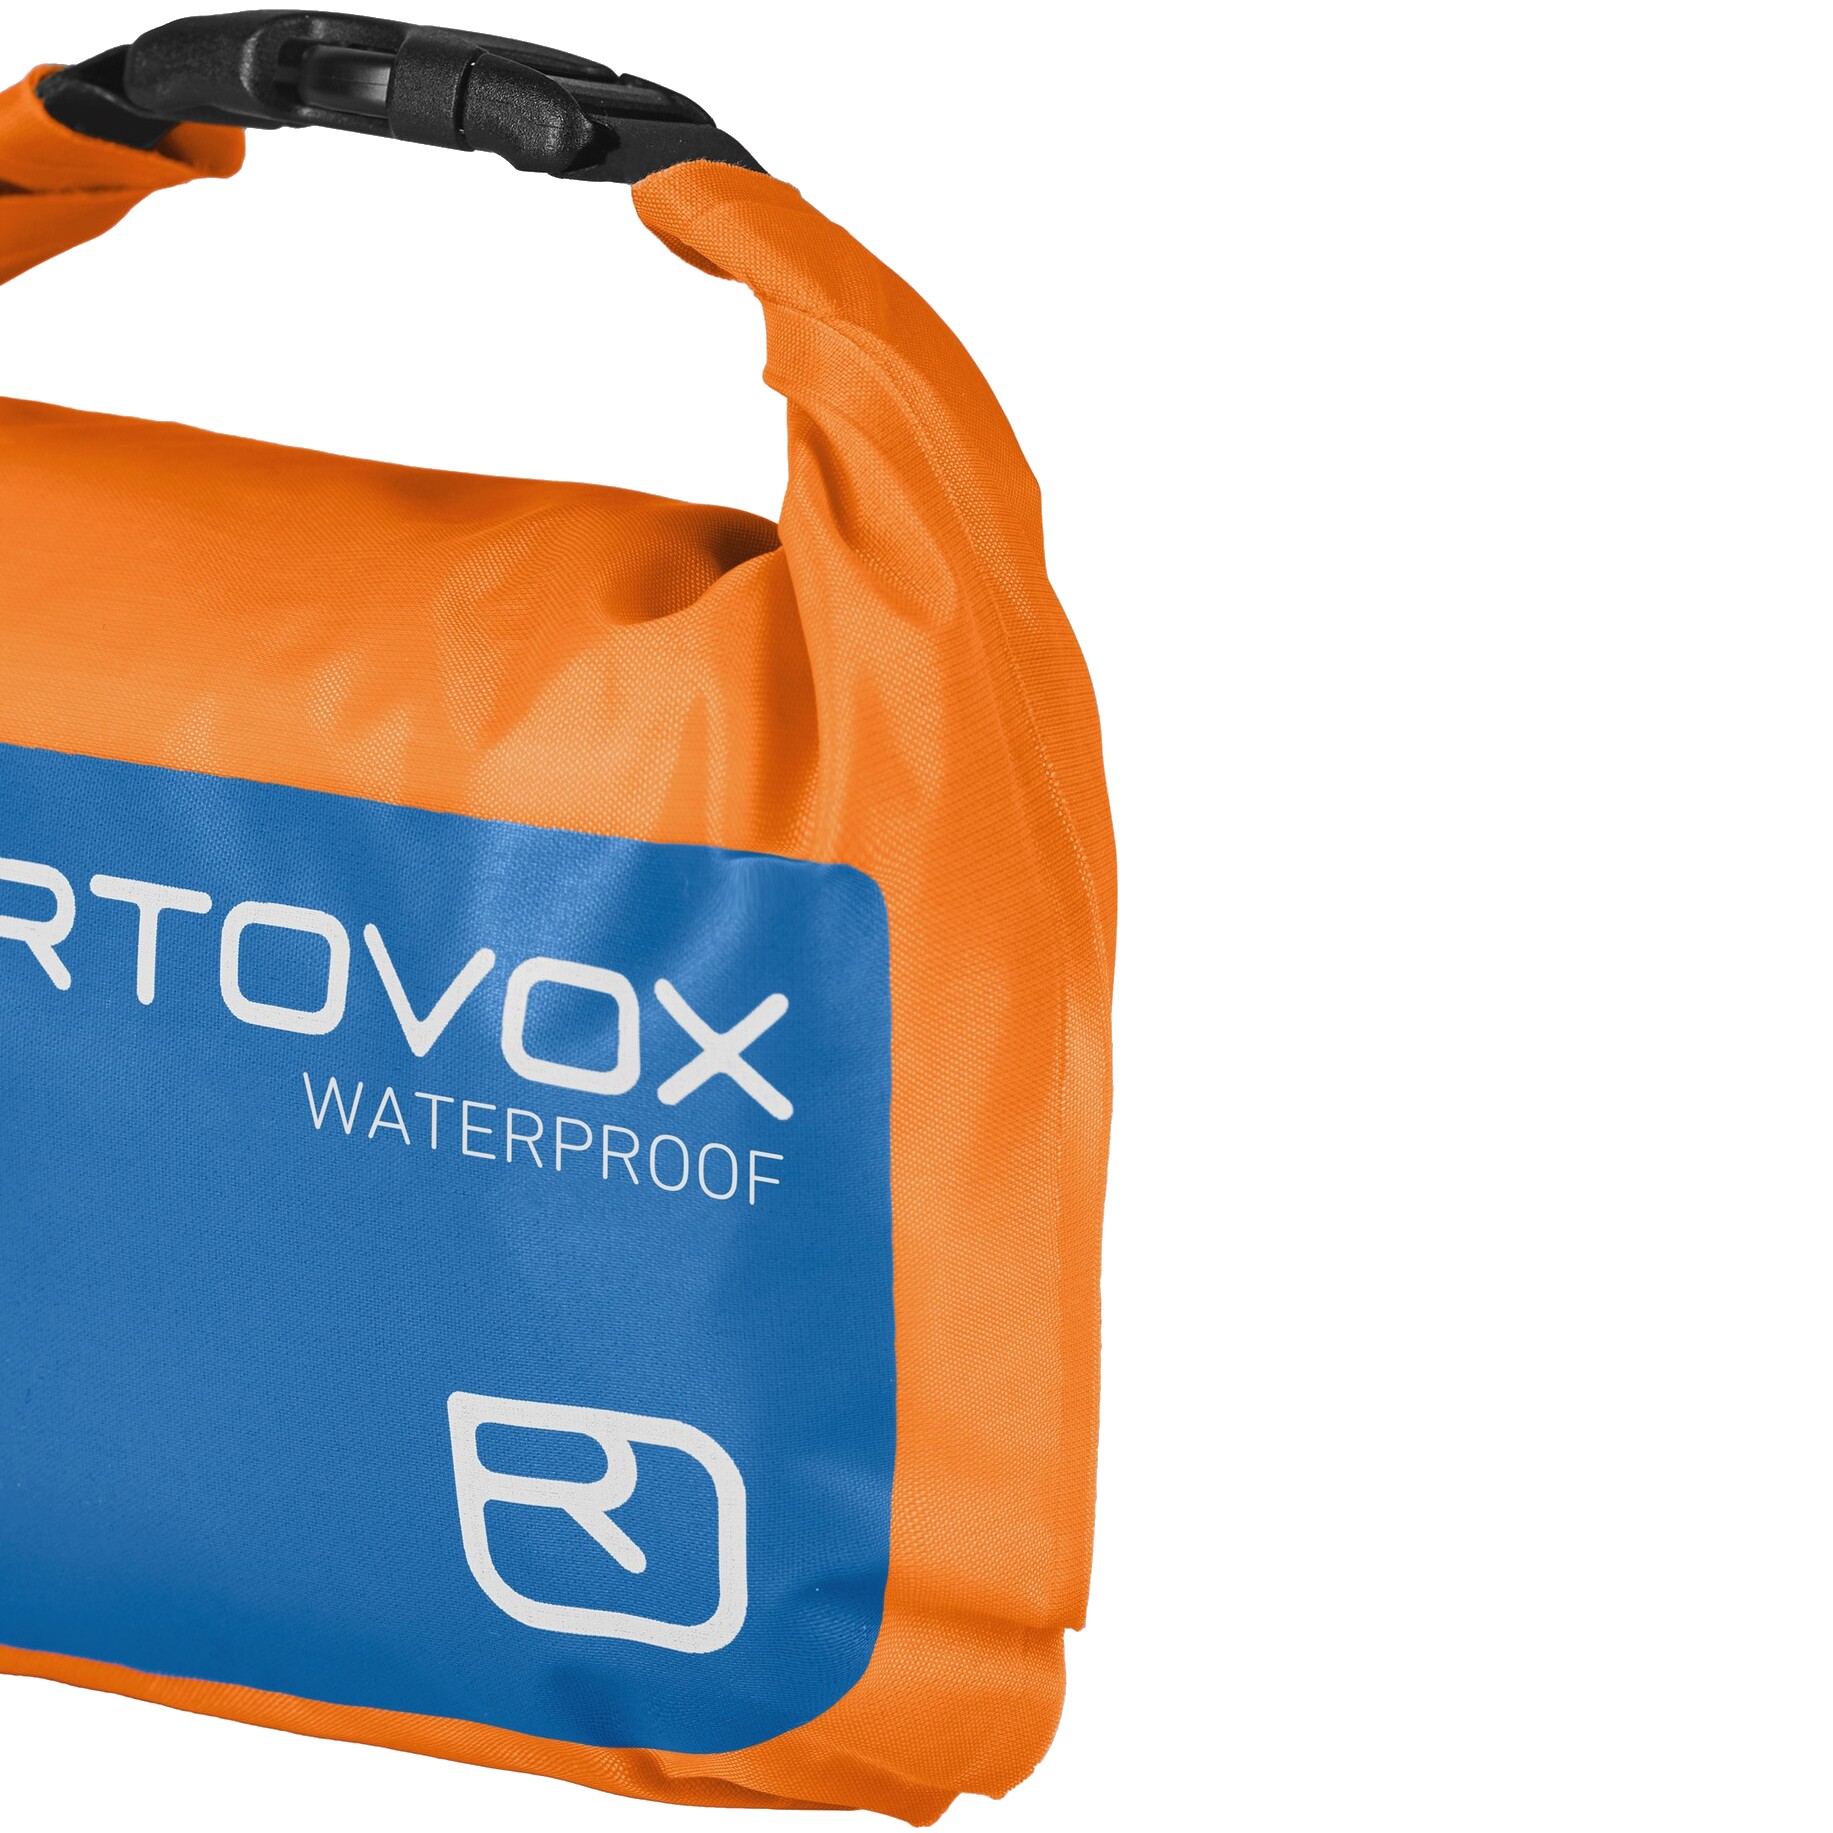 Ortovox First Aid Waterproof First Aid Kit